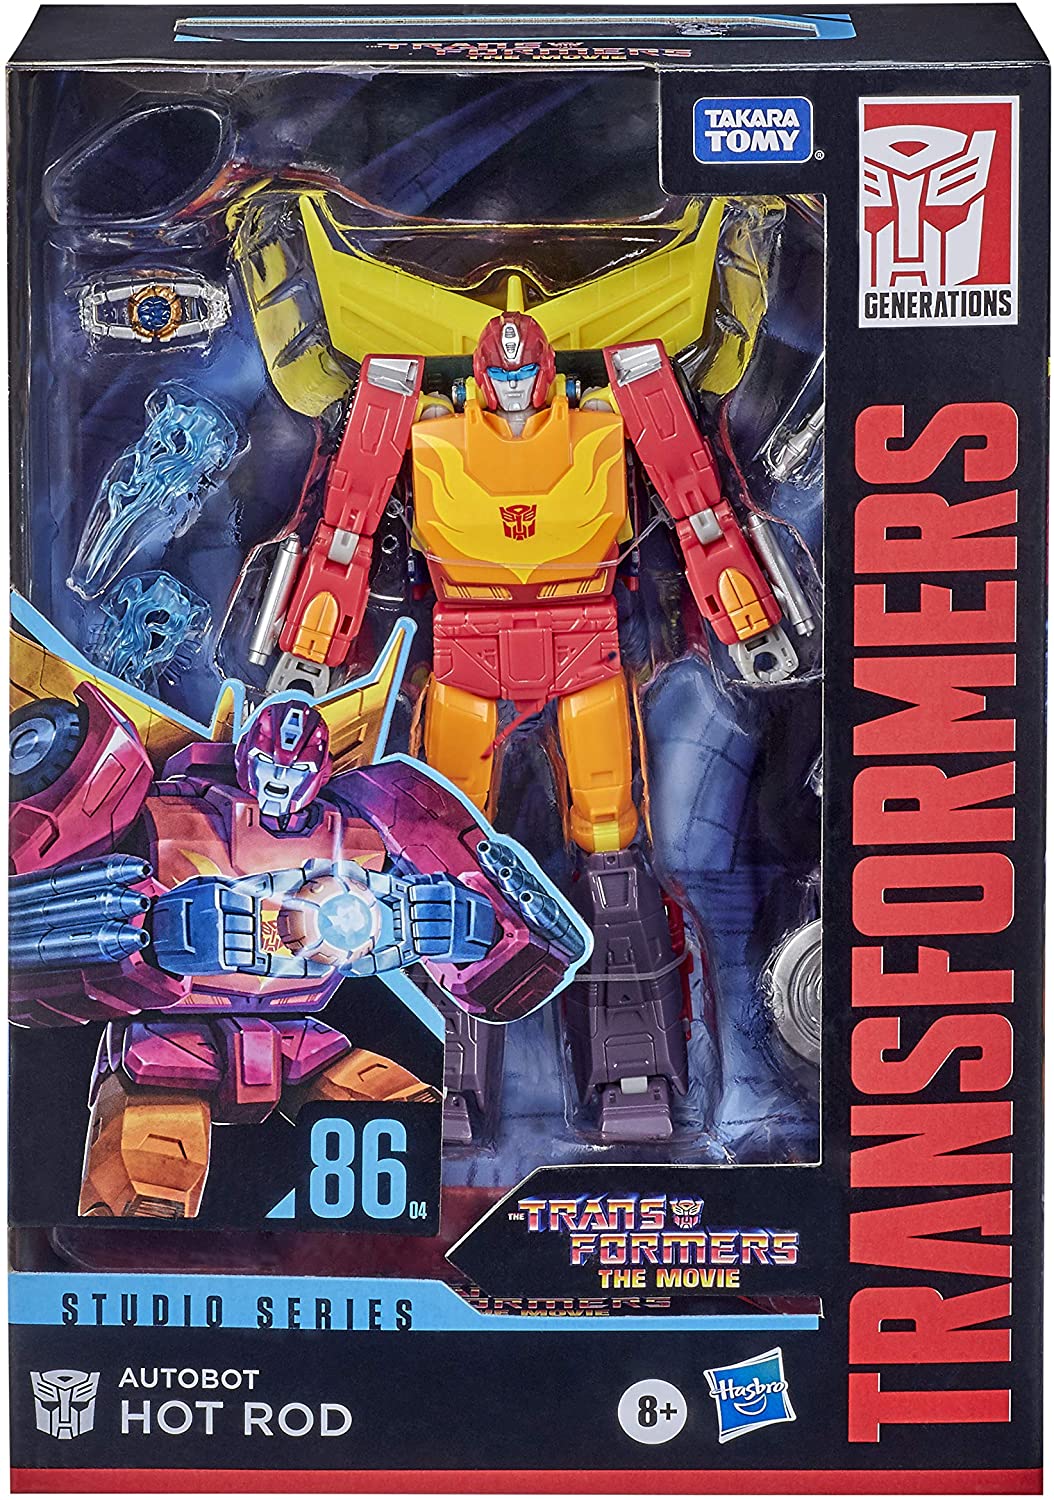 TRANSFORMERS Toy Studio Series 86 Voyager Class The Battle for Cybertron 1986 Autobot Hot Rod Figure - Ages 8+, 16.5cm